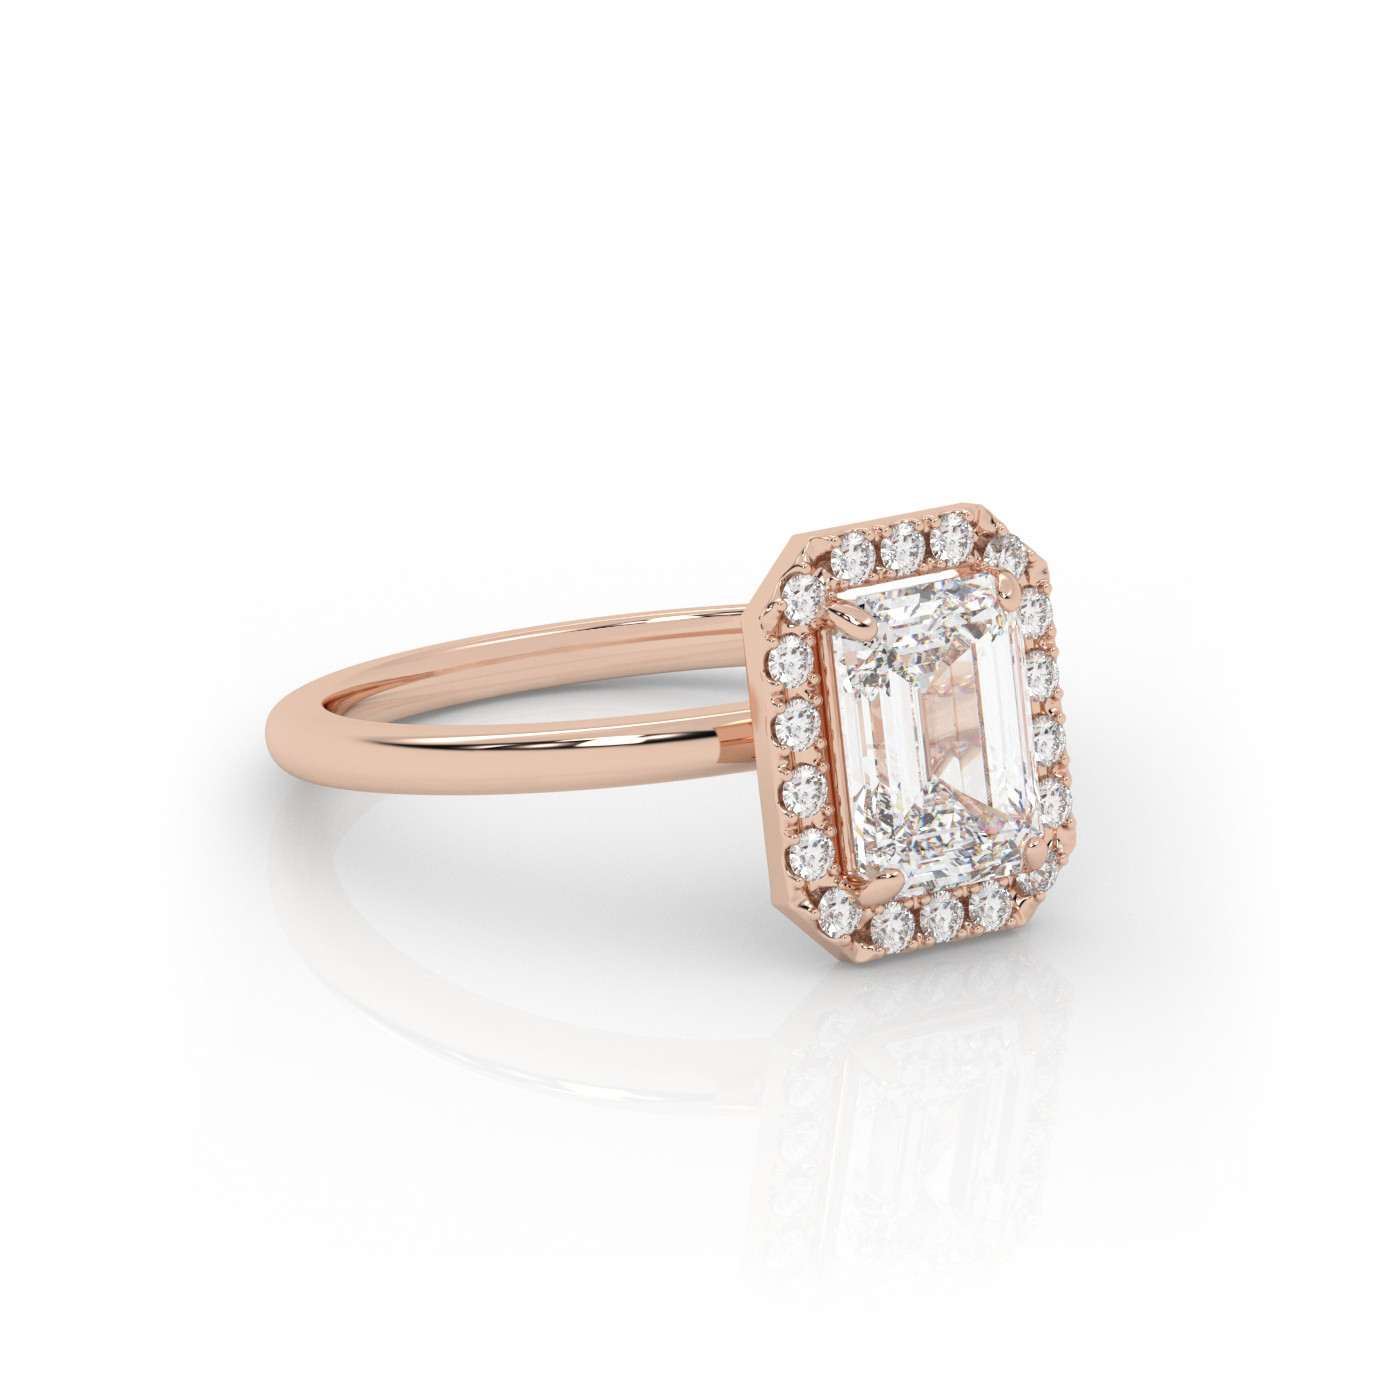 18K ROSE GOLD Emerald Diamond Engagement Ring with Halo Style